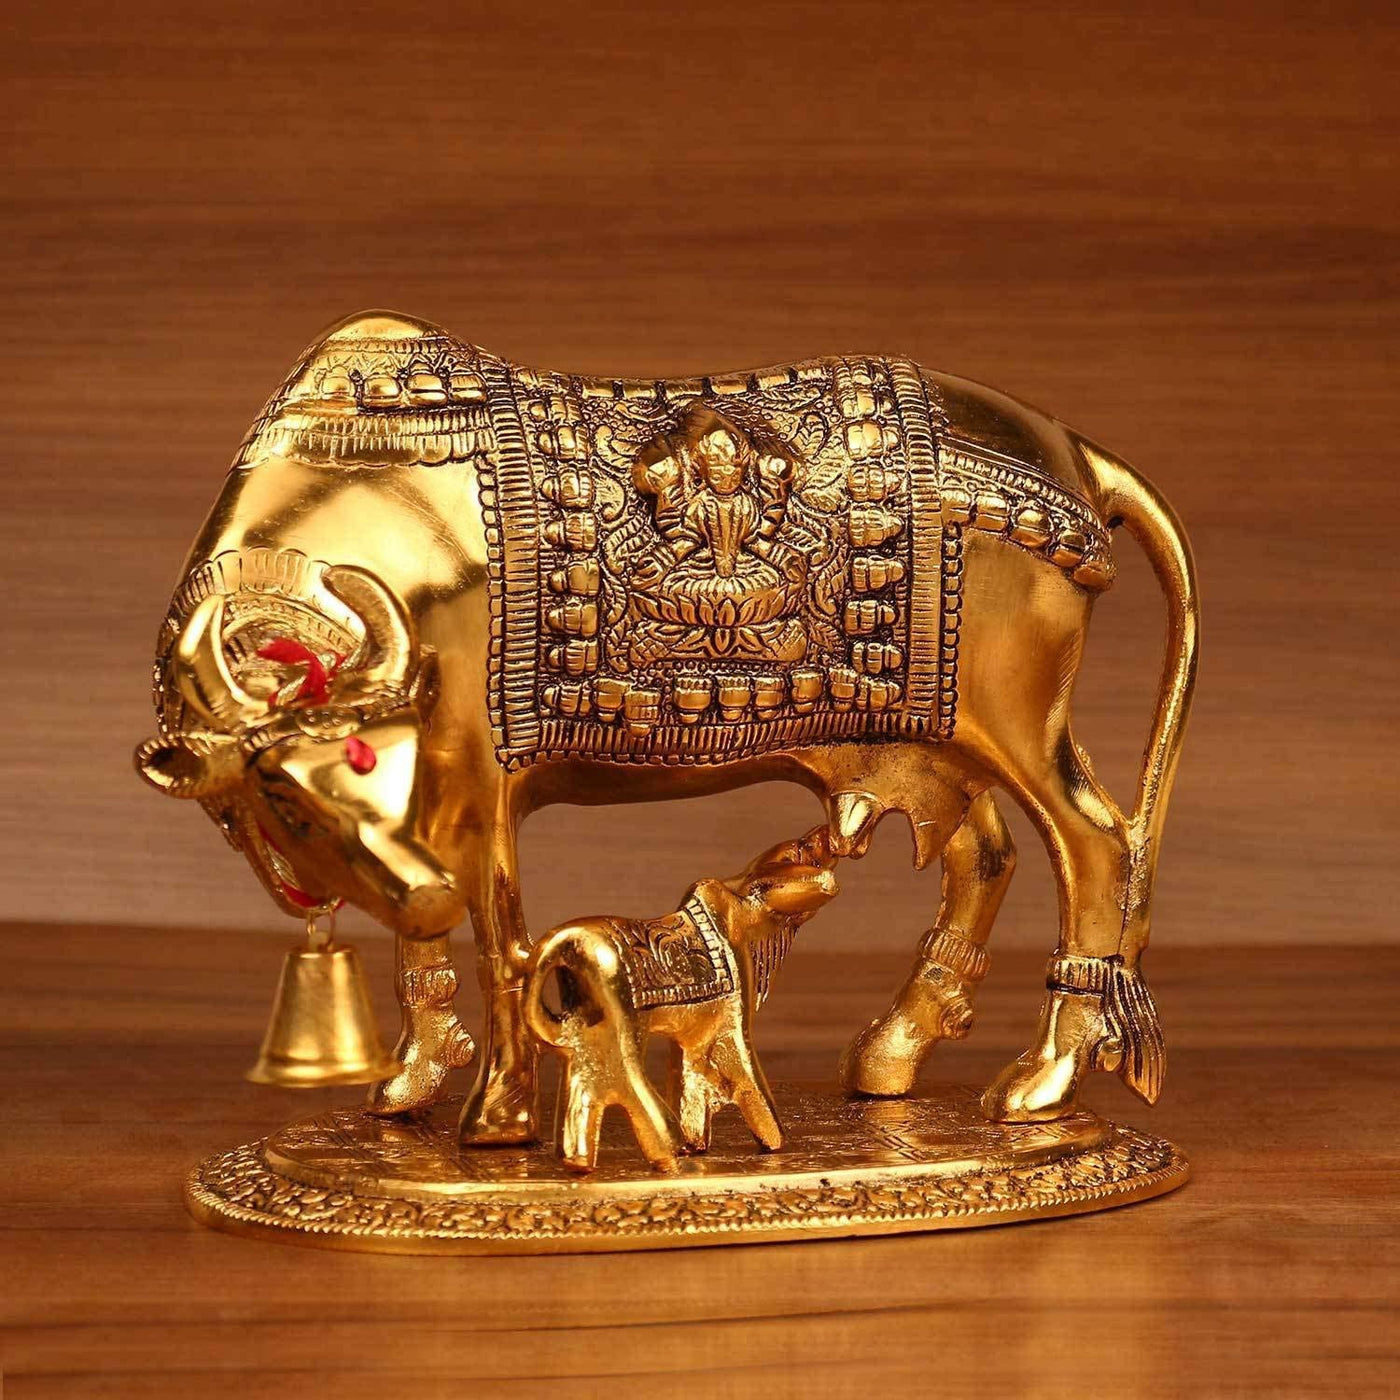 280 Rs each on buying 🏷in bulk | Call 📞 at 8619550223 Kamdhenu Cow and Calf Showpiece LAMANSH® Golden Plated Kamdhenu Cow and Calf Statues for Return Gifting 🎁 in Pooja & Wedding ceremony